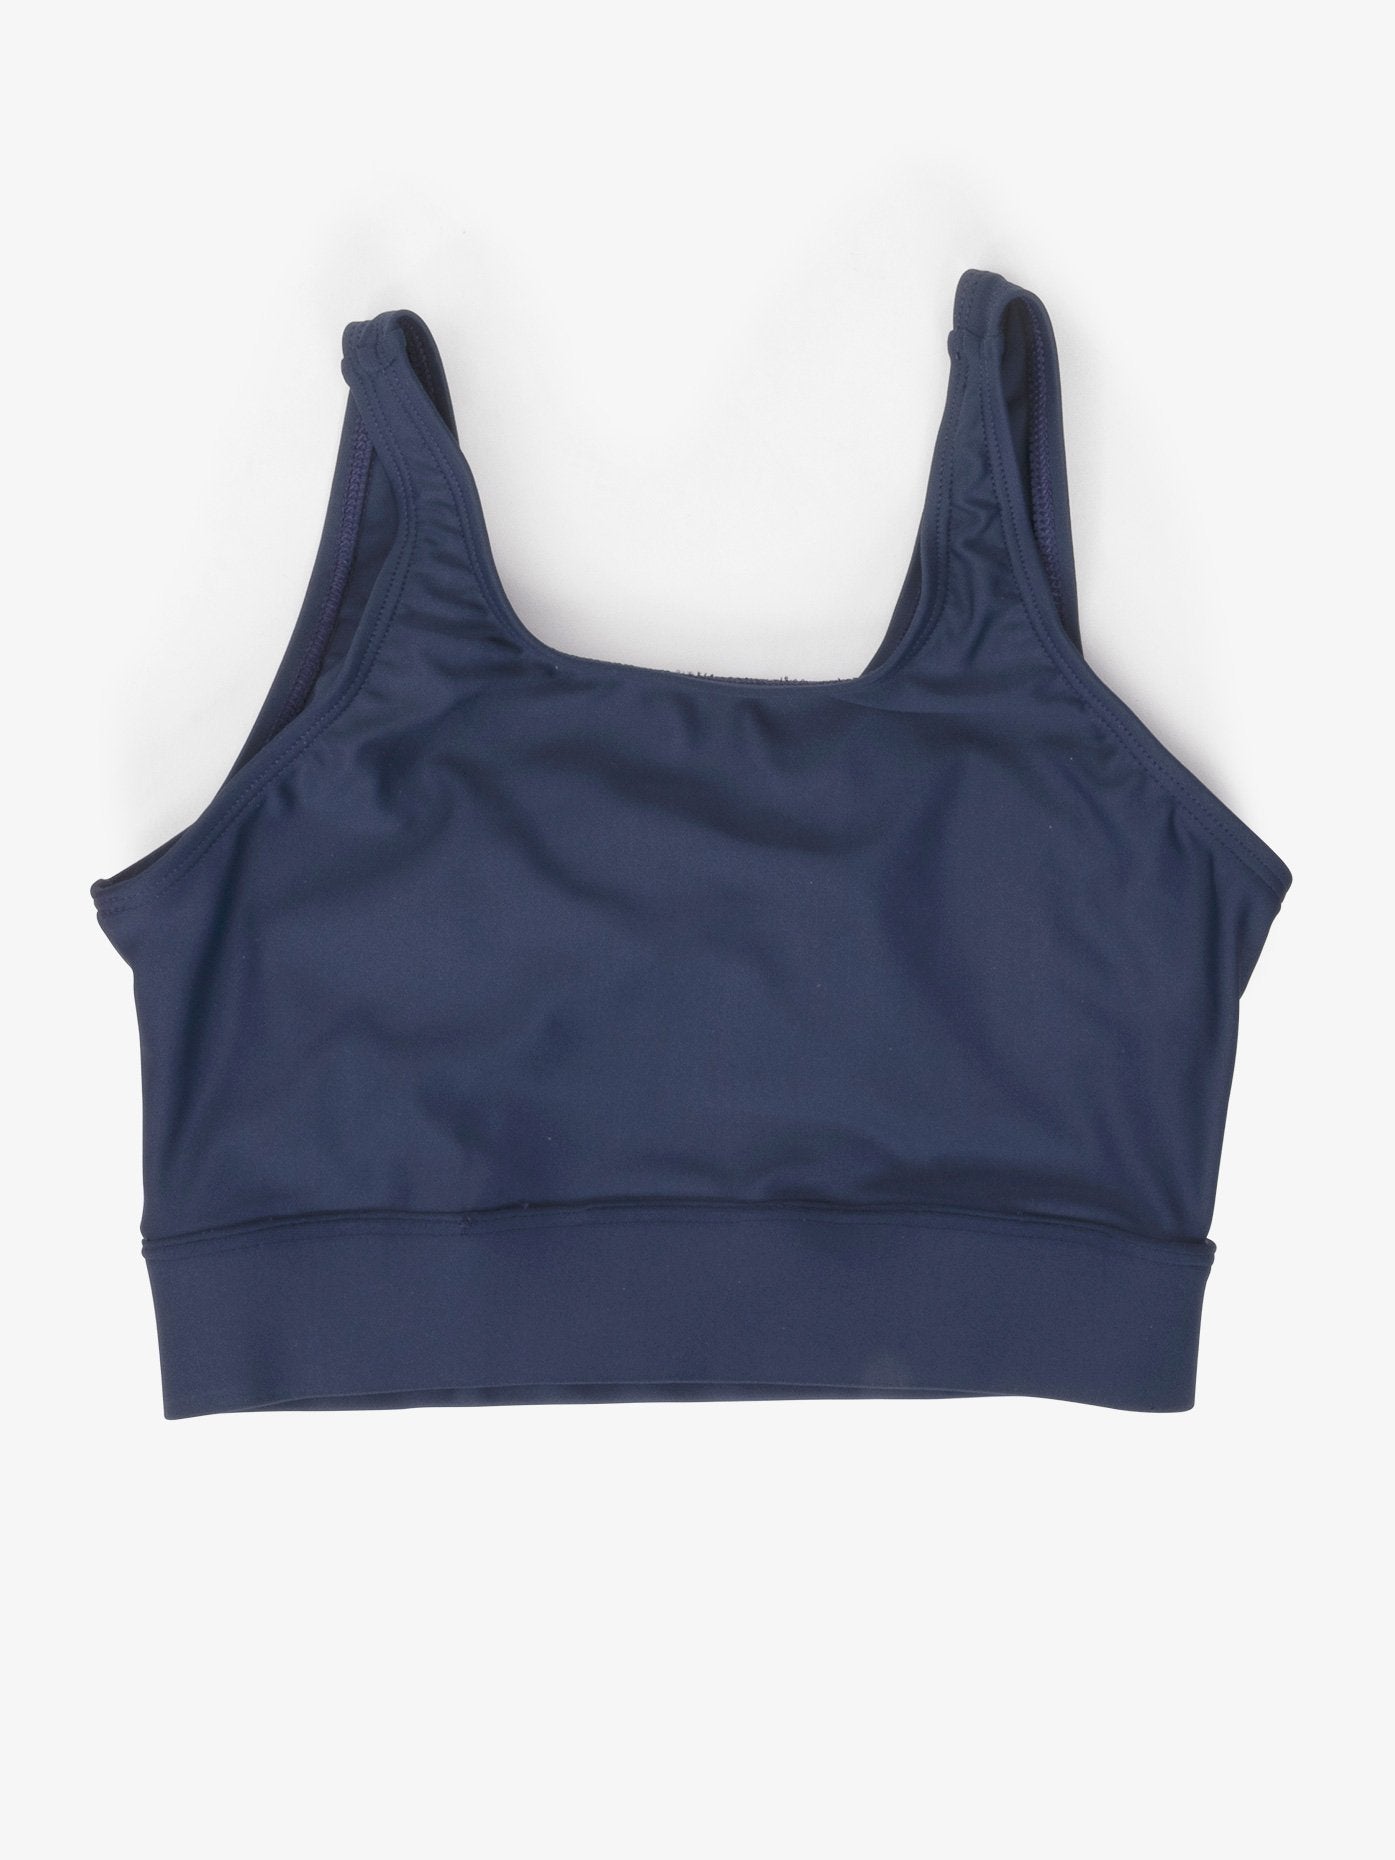 Women’s pinched back grey bra top